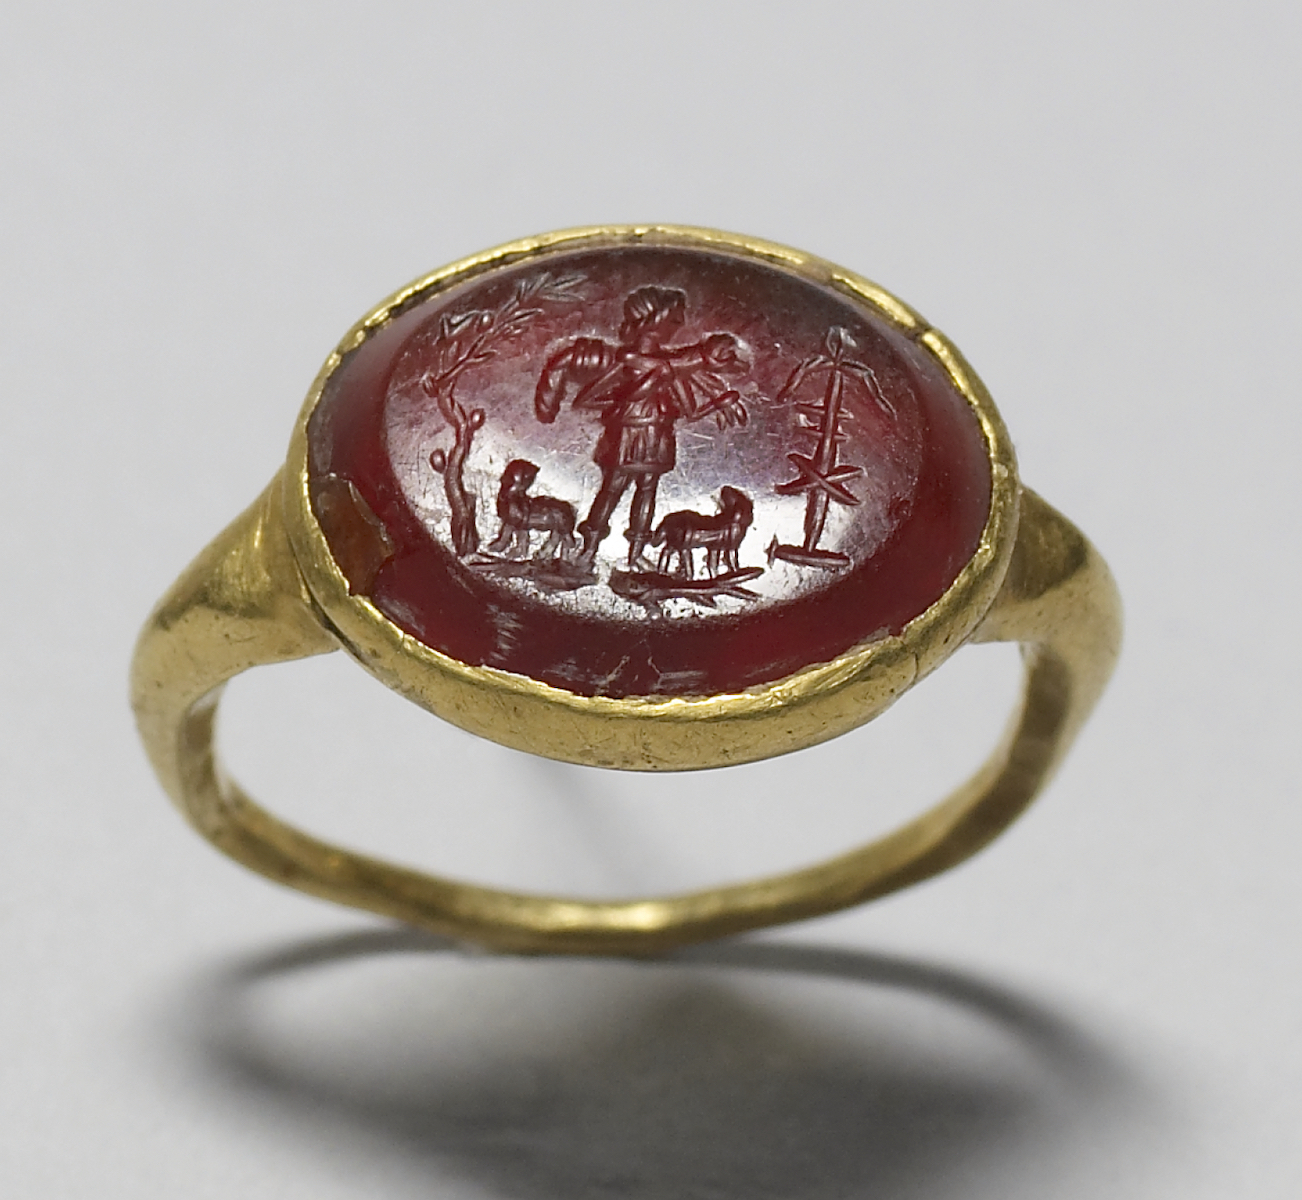 Gold ring set with oval red gem carved with scene of a young man, wearing tunic, holding sheep over shoulders and flanked by two sheep and a tree with dove and anchor with monogram.